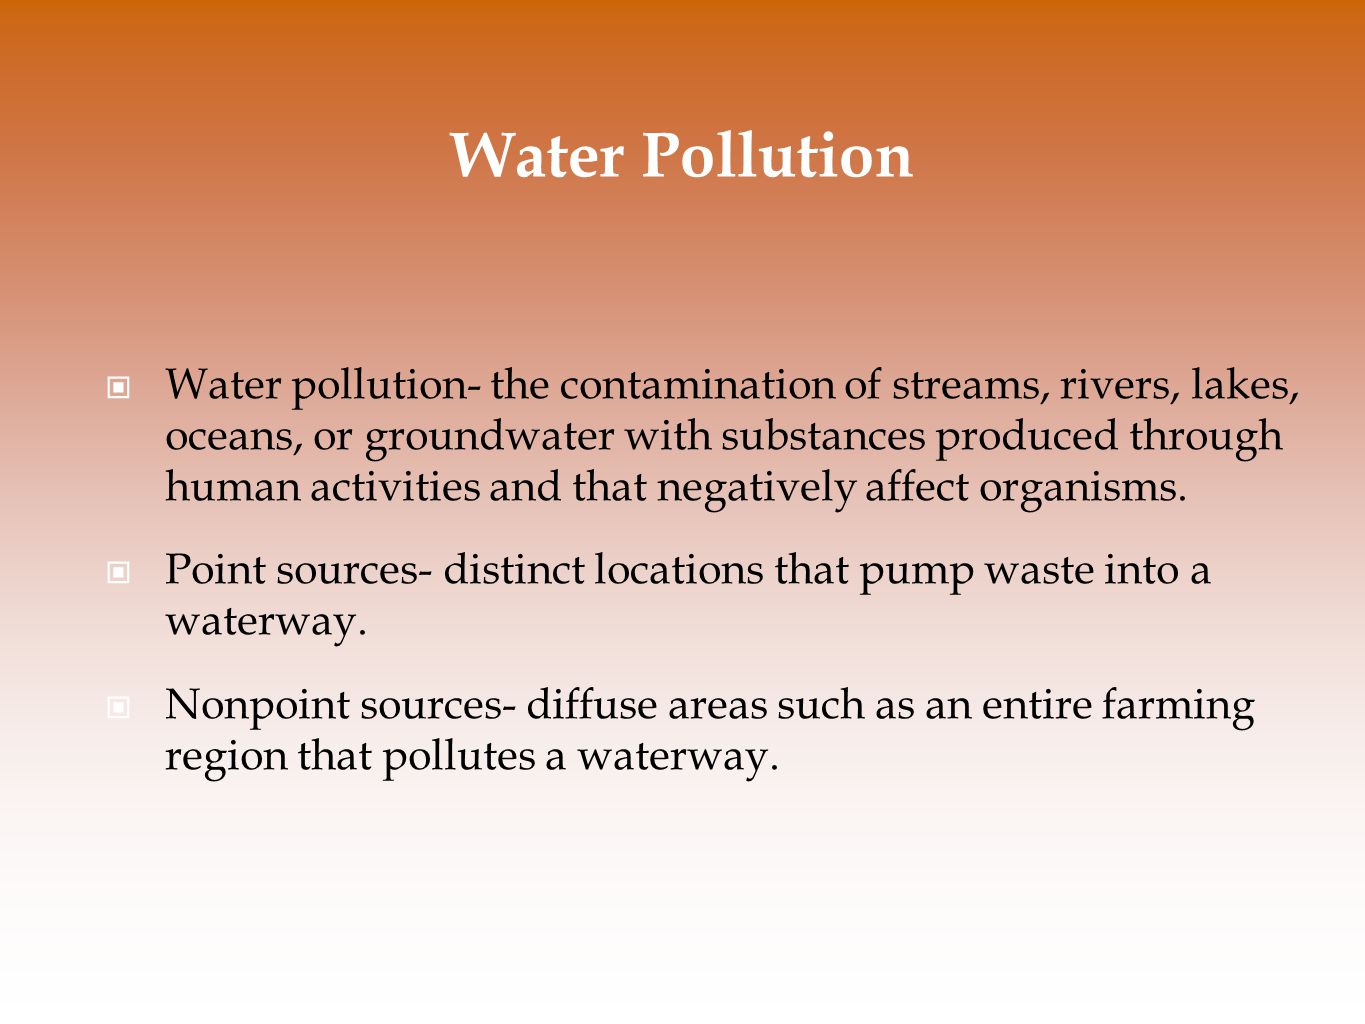 Water pollution- the contamination of streams, rivers, lakes, oceans, or groundwater with substances produced through human activities and that negatively affect organisms.